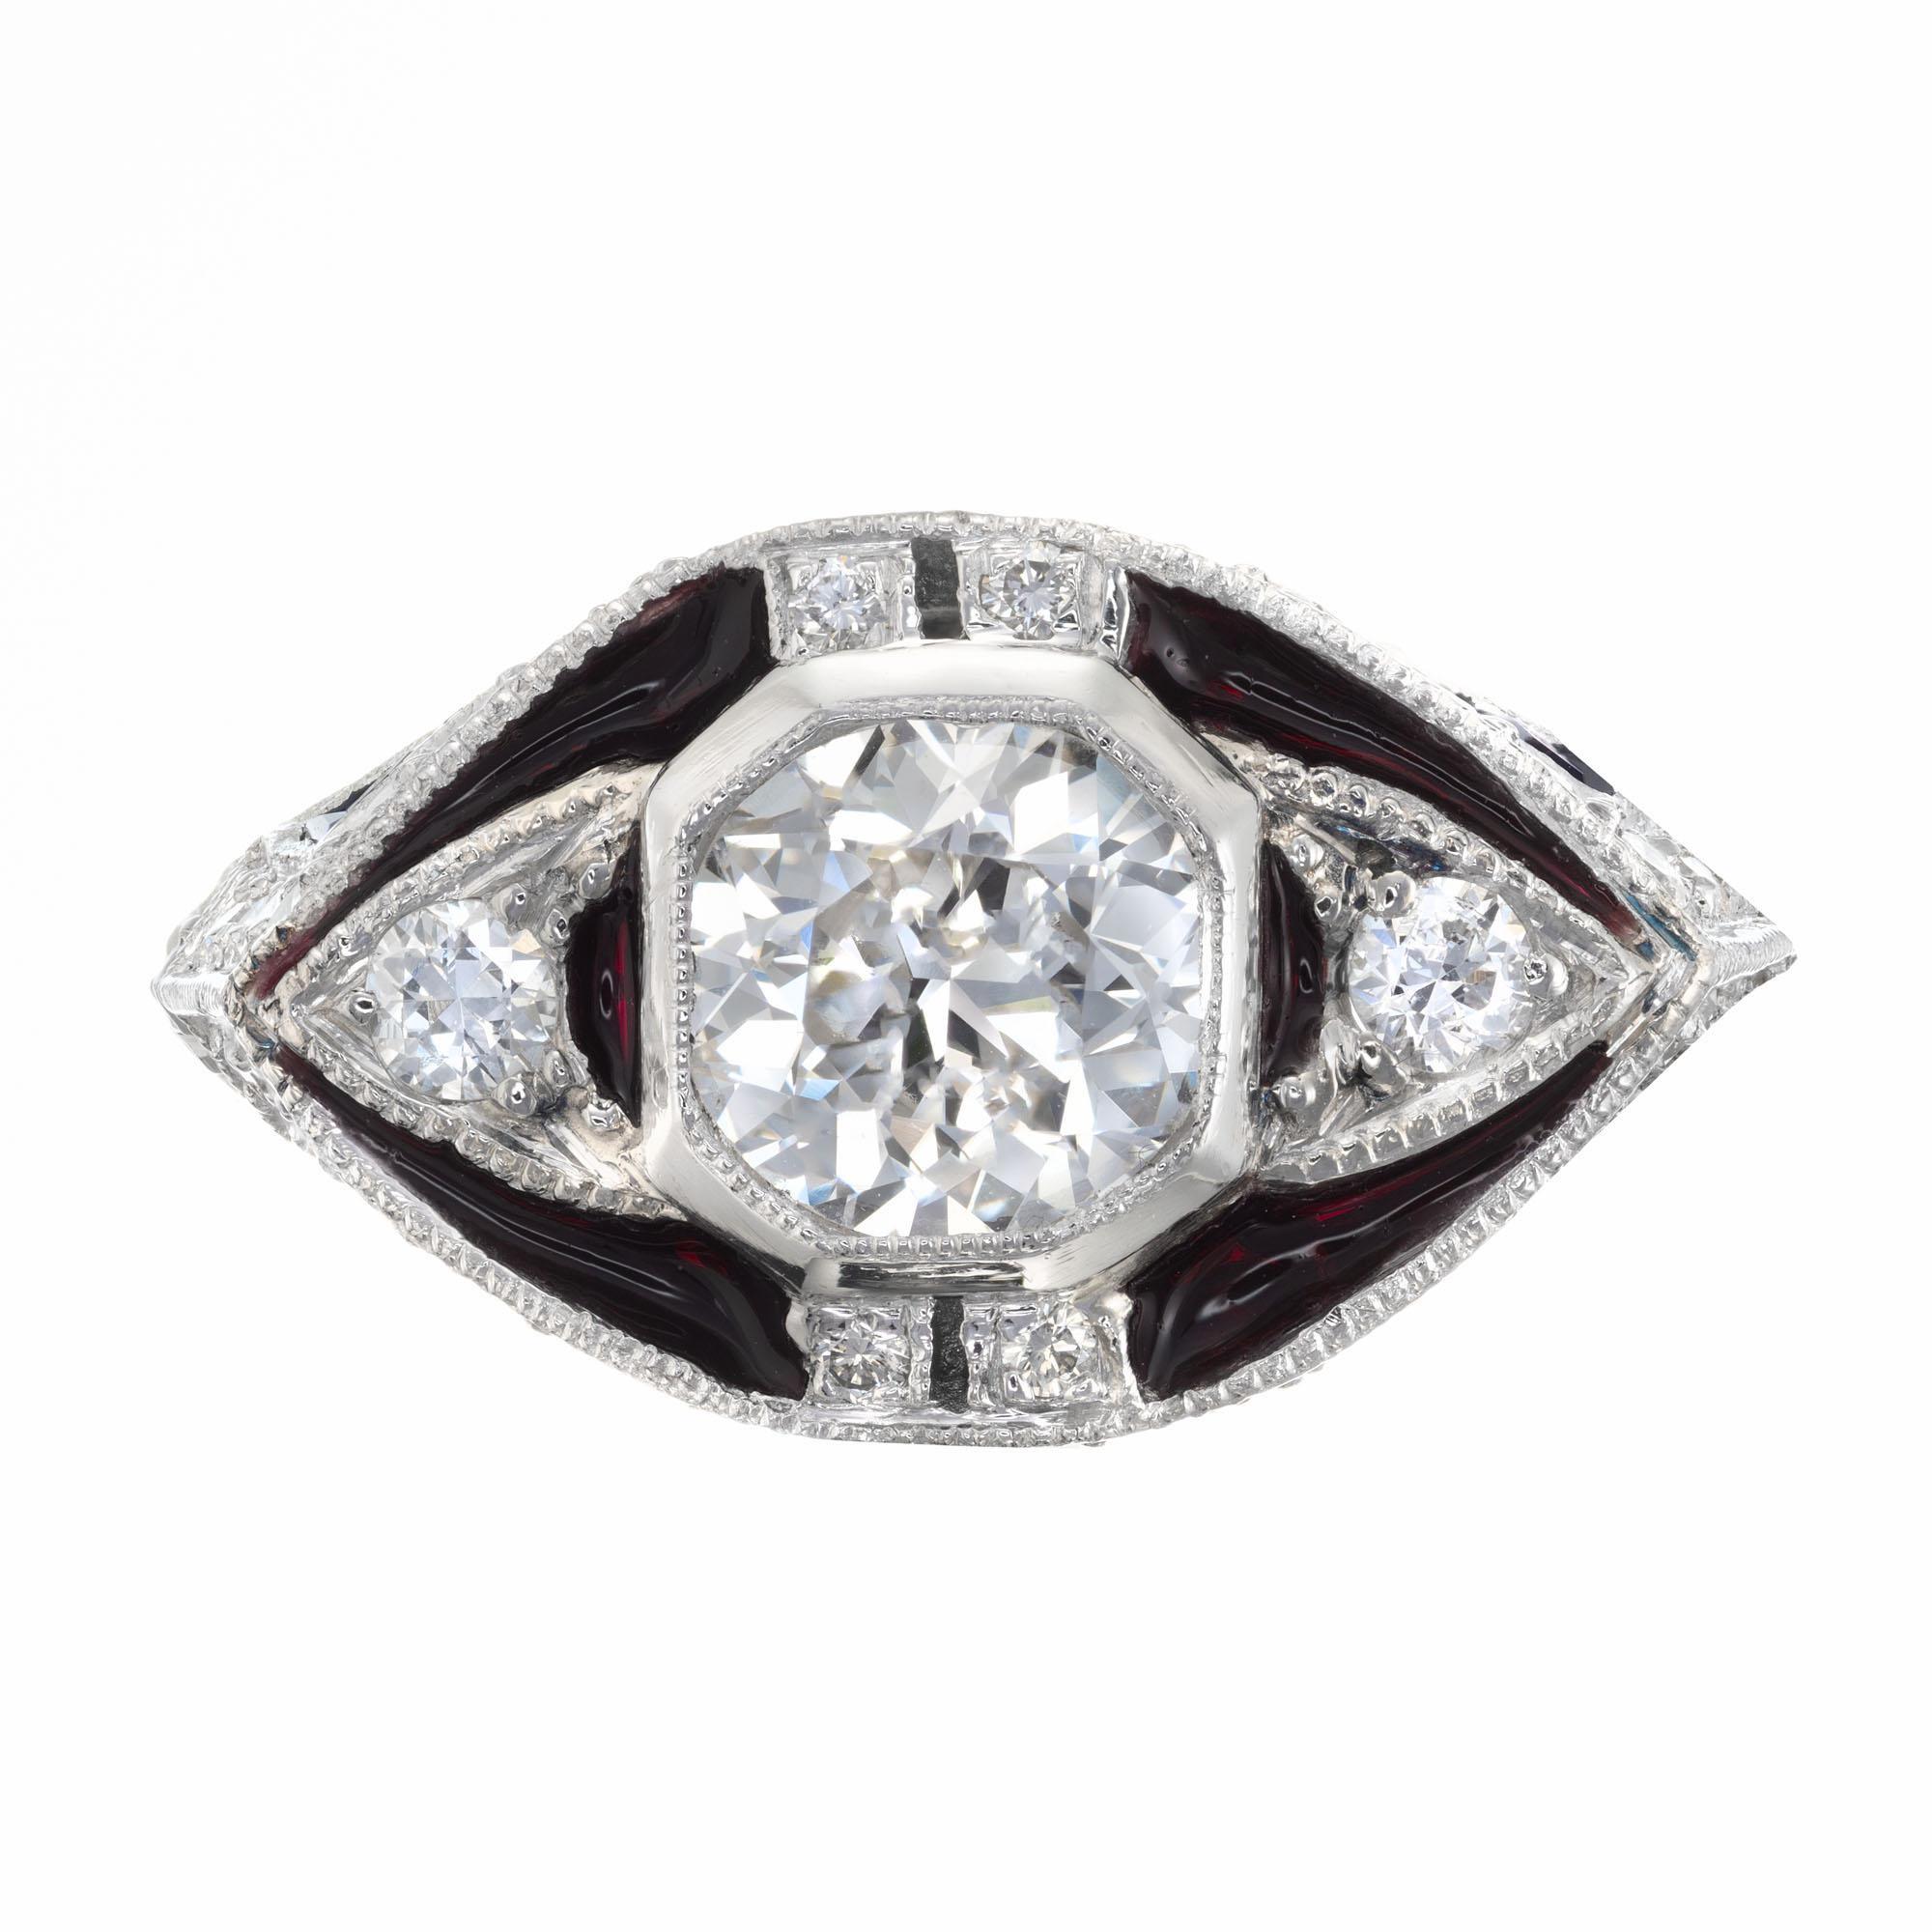 1950's Diamond and sapphire red enamel engagement ring. Round old European center diamond in a hand engraved platinum setting with pave set full cut diamonds, custom cut genuine sapphires and red enamel accents.  EGL certified. note: the red enamel